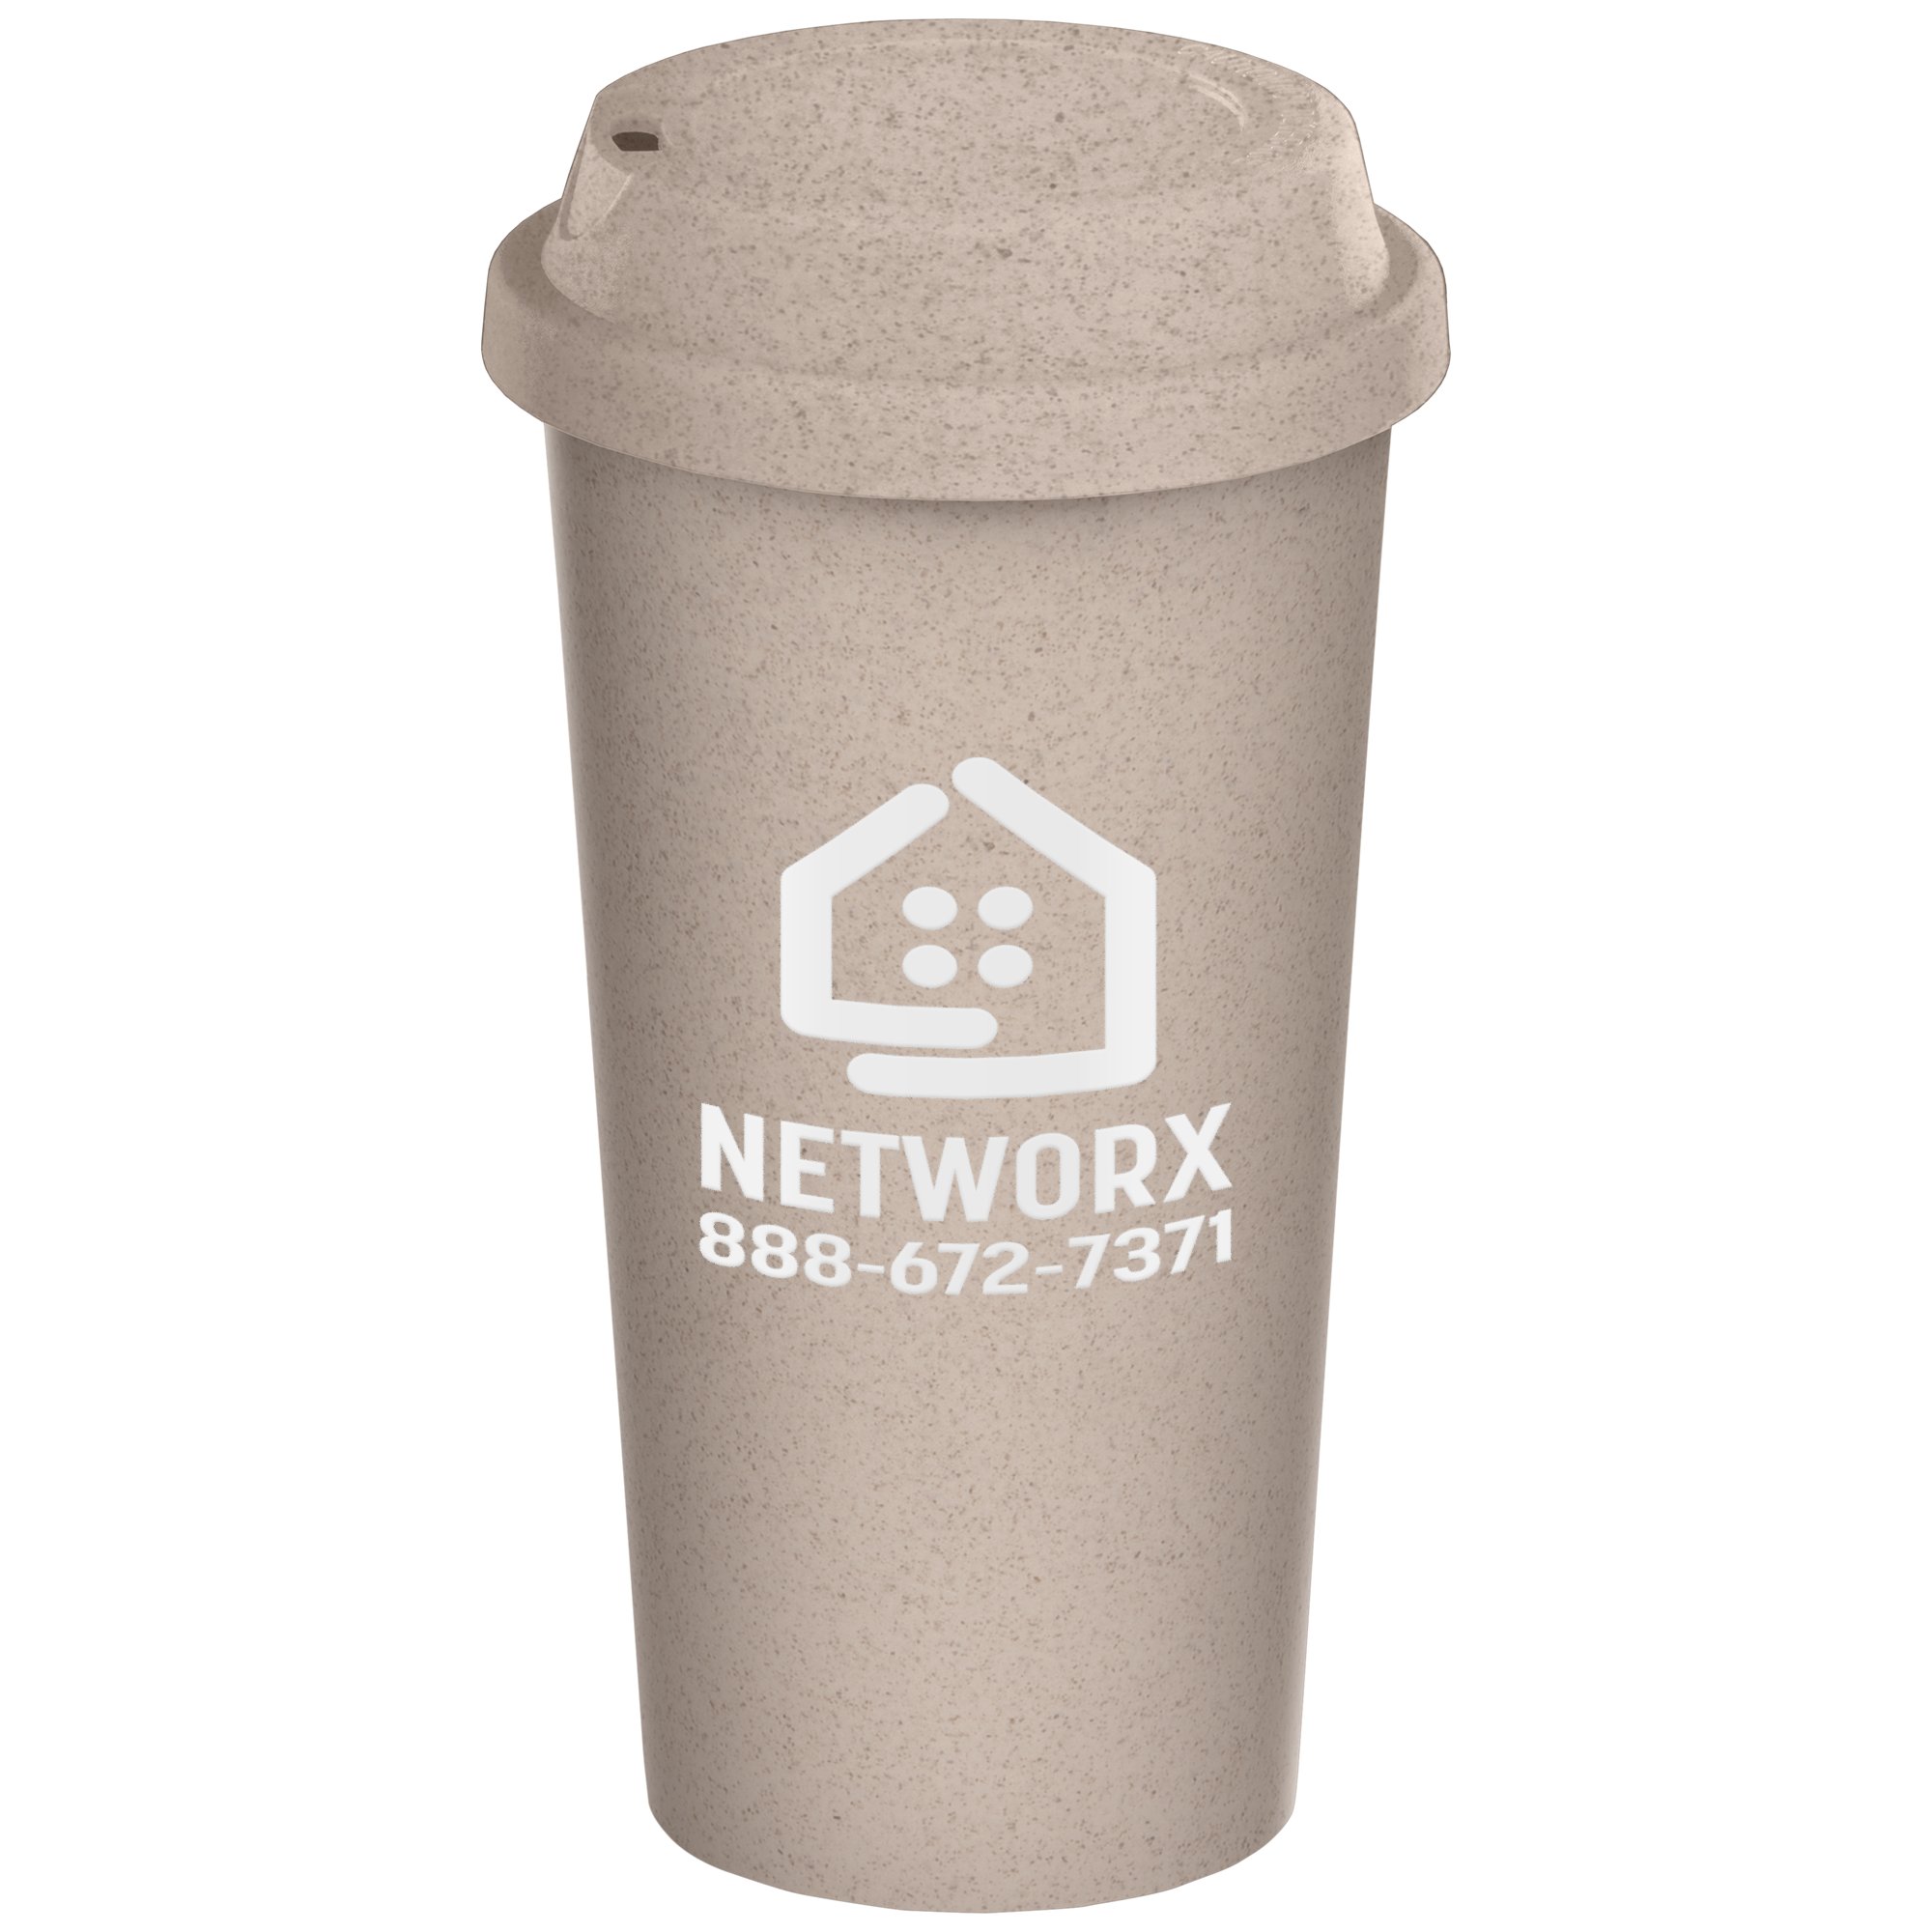 16 oz Wheat Straw Mug - HPG - Promotional Products Supplier